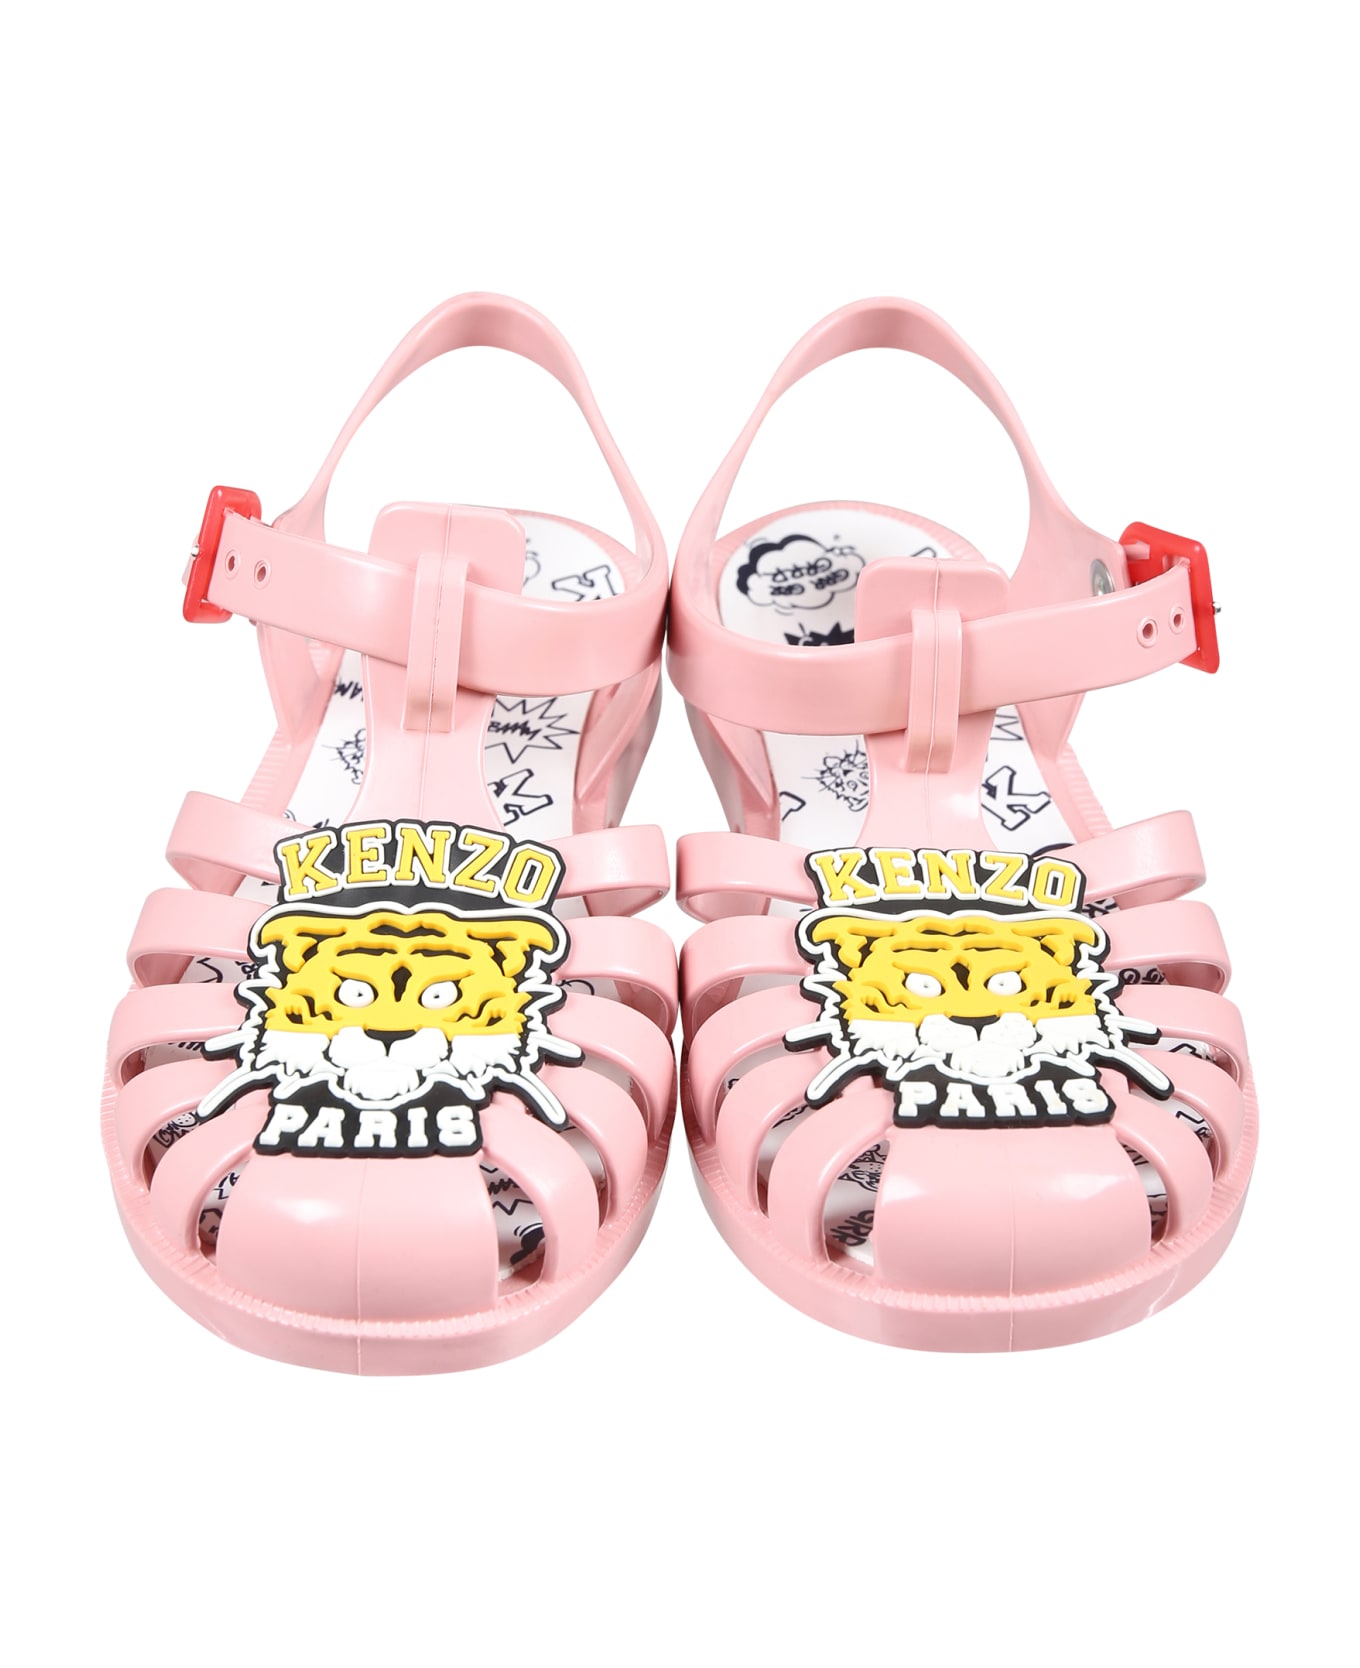 Kenzo Kids Pink Sandals For Girl With Tiger - Rosa シューズ